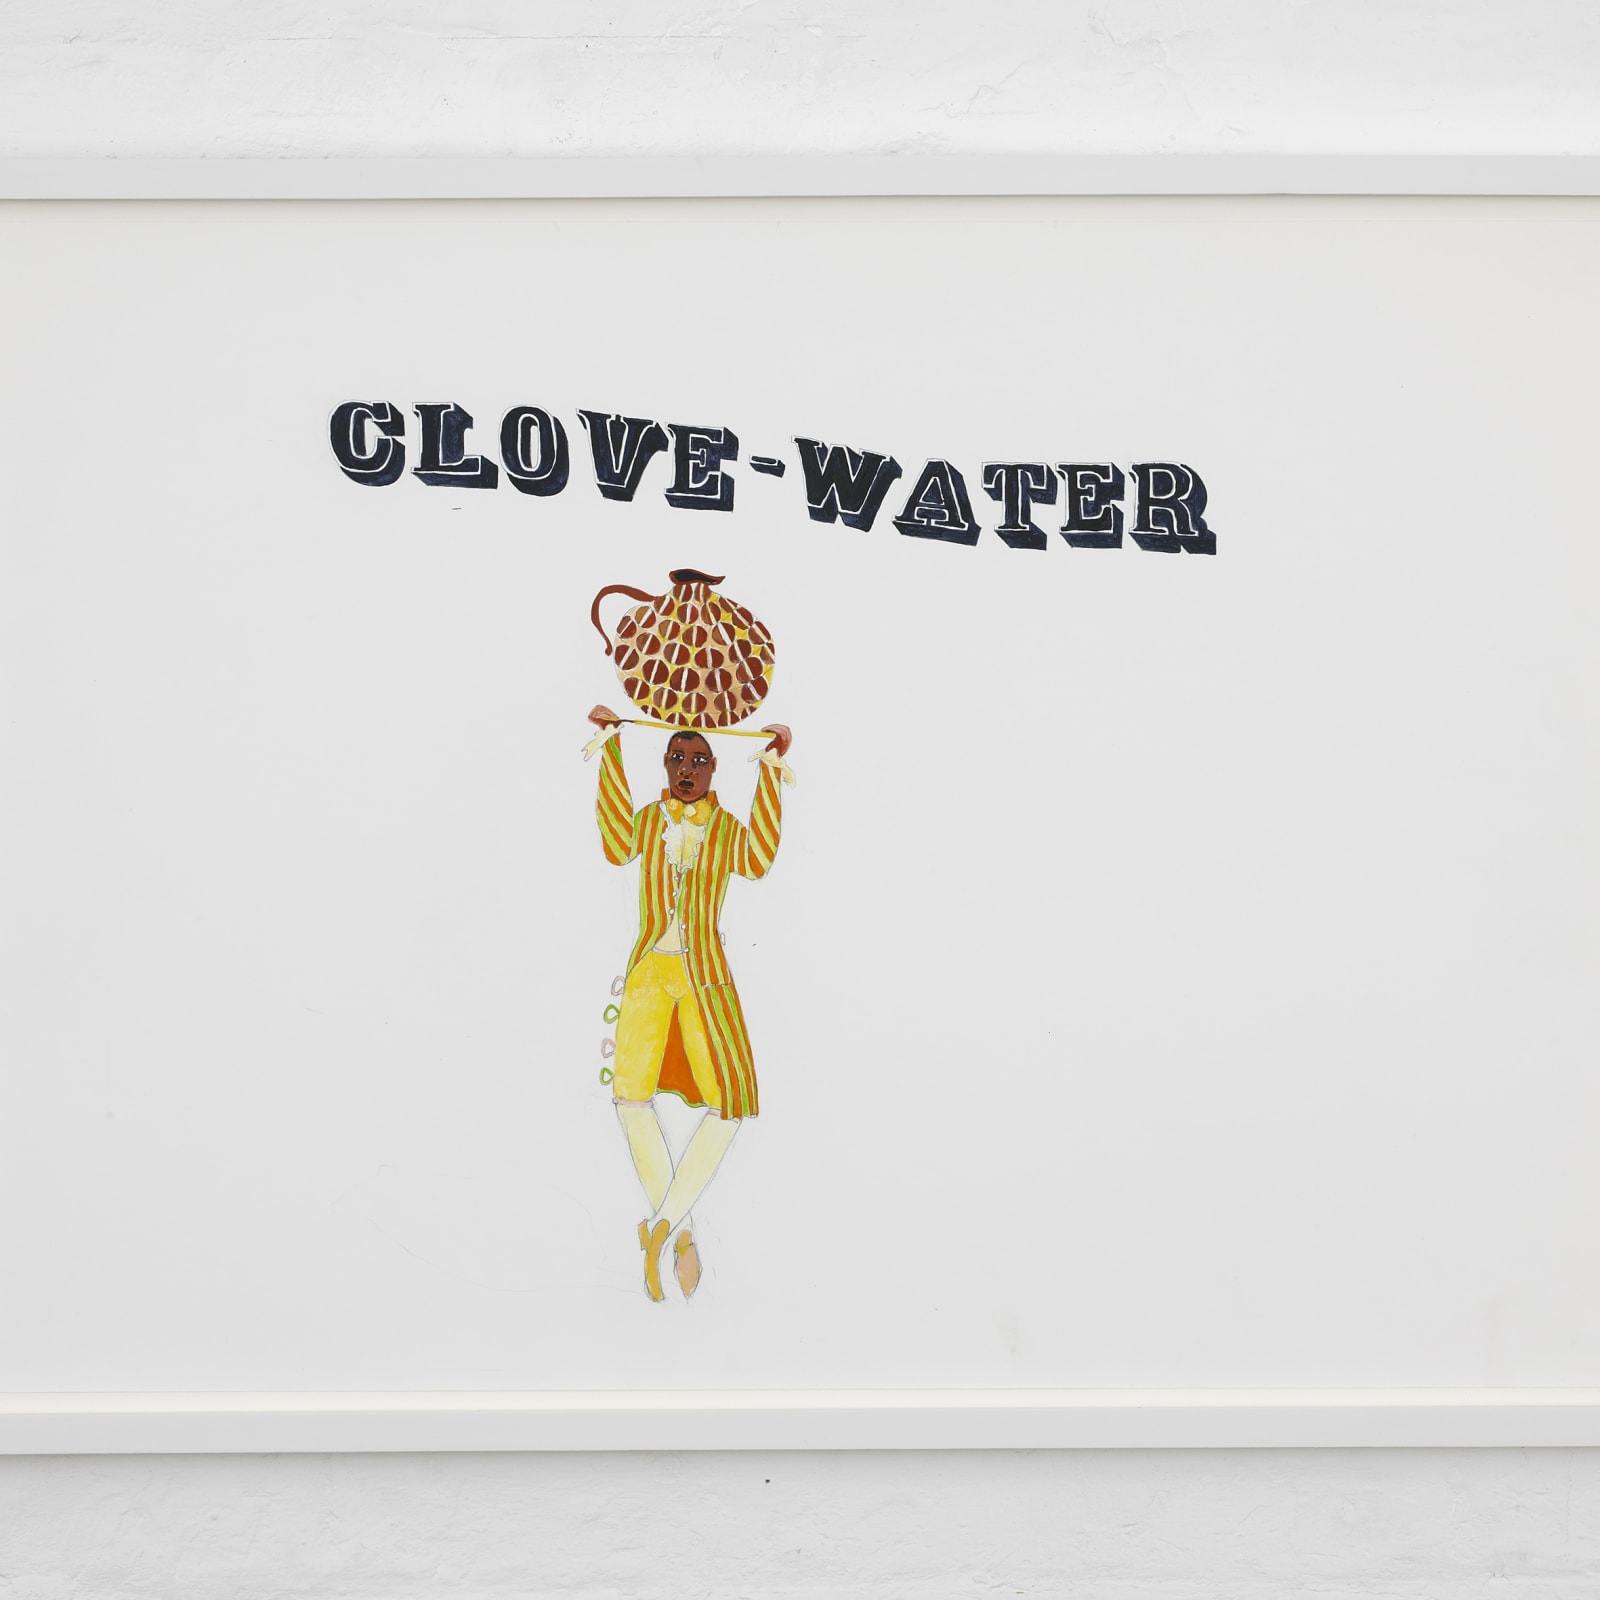 Lubaina Himid, Untitled, 2010, Acrylic and Pencil on Paper. Courtesy the Artist and Hollybush Gardens, Photo: Andy Keate.